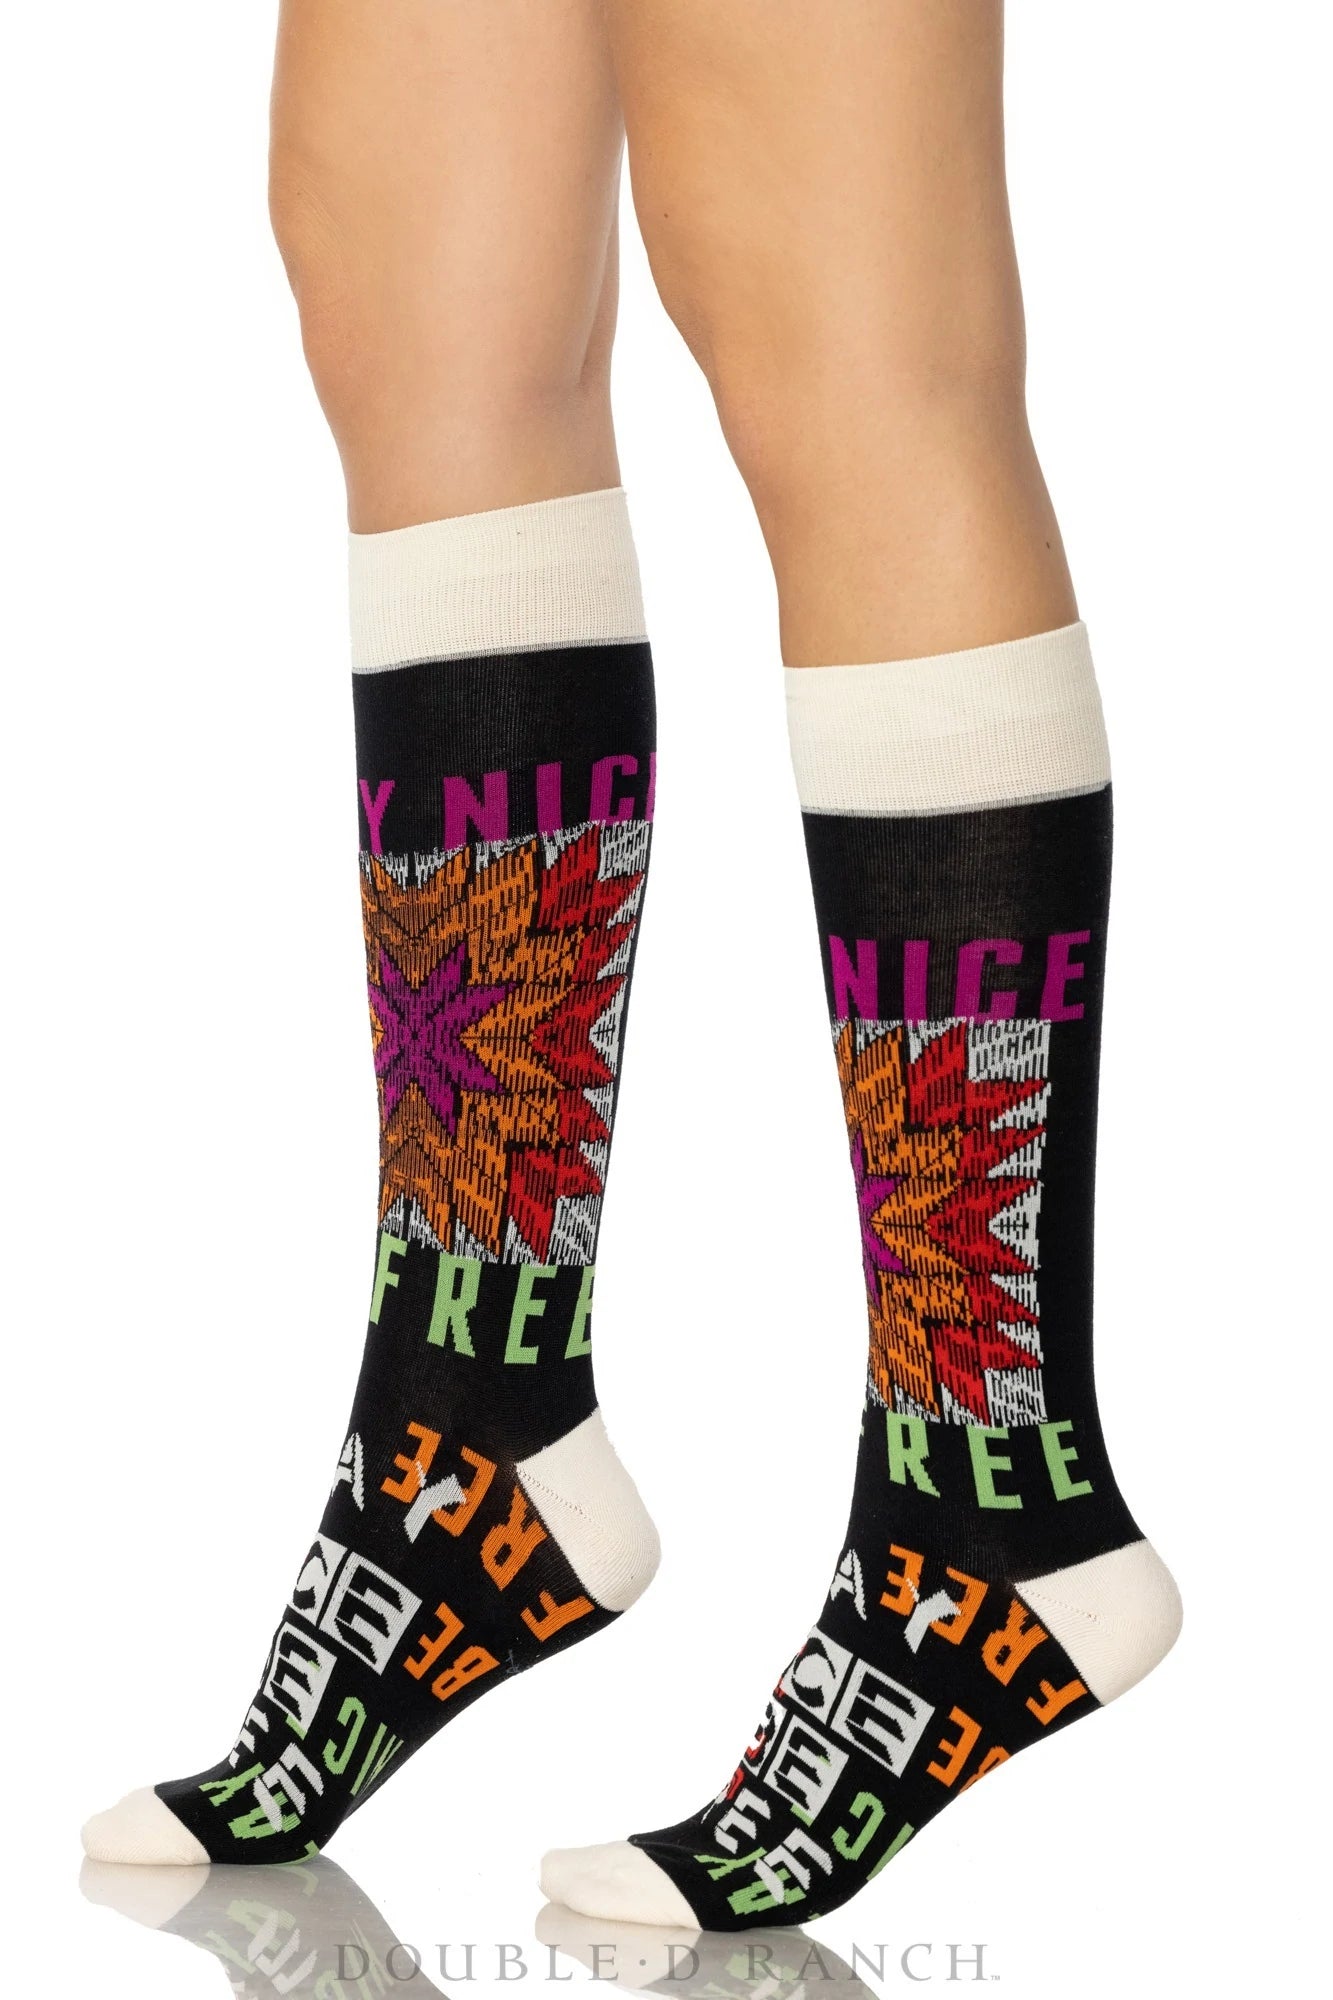 Load image into Gallery viewer, Double D Ranch Boot Socks
